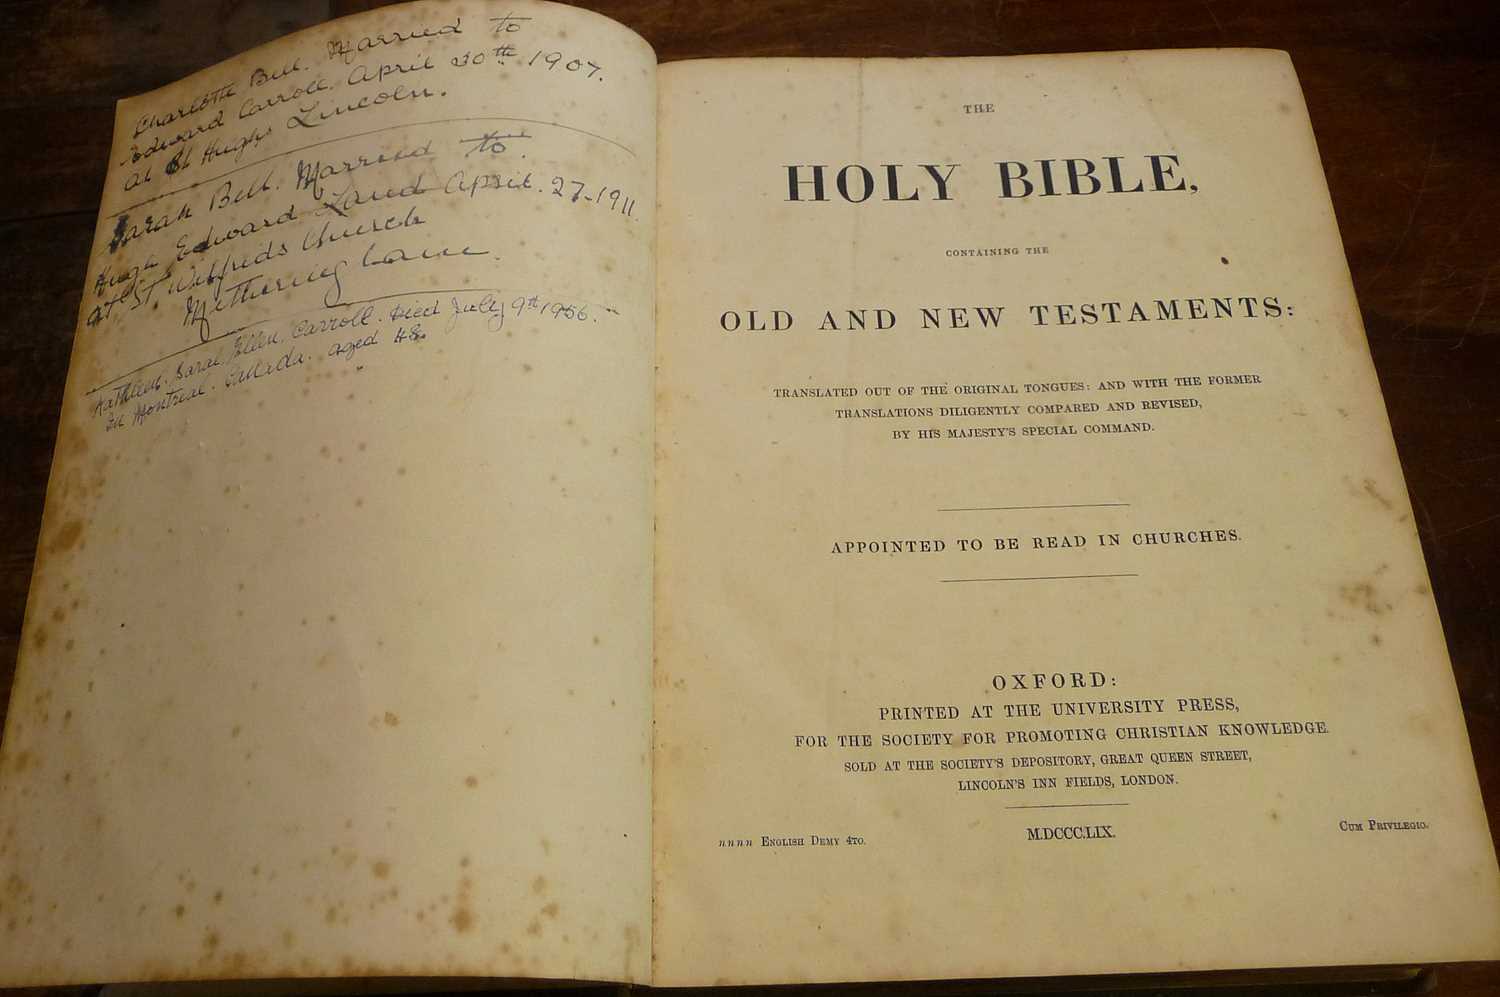 1859 Holy Bible, pub. Oxford Universit Press and appointed to read in churches, full leather - Image 2 of 4